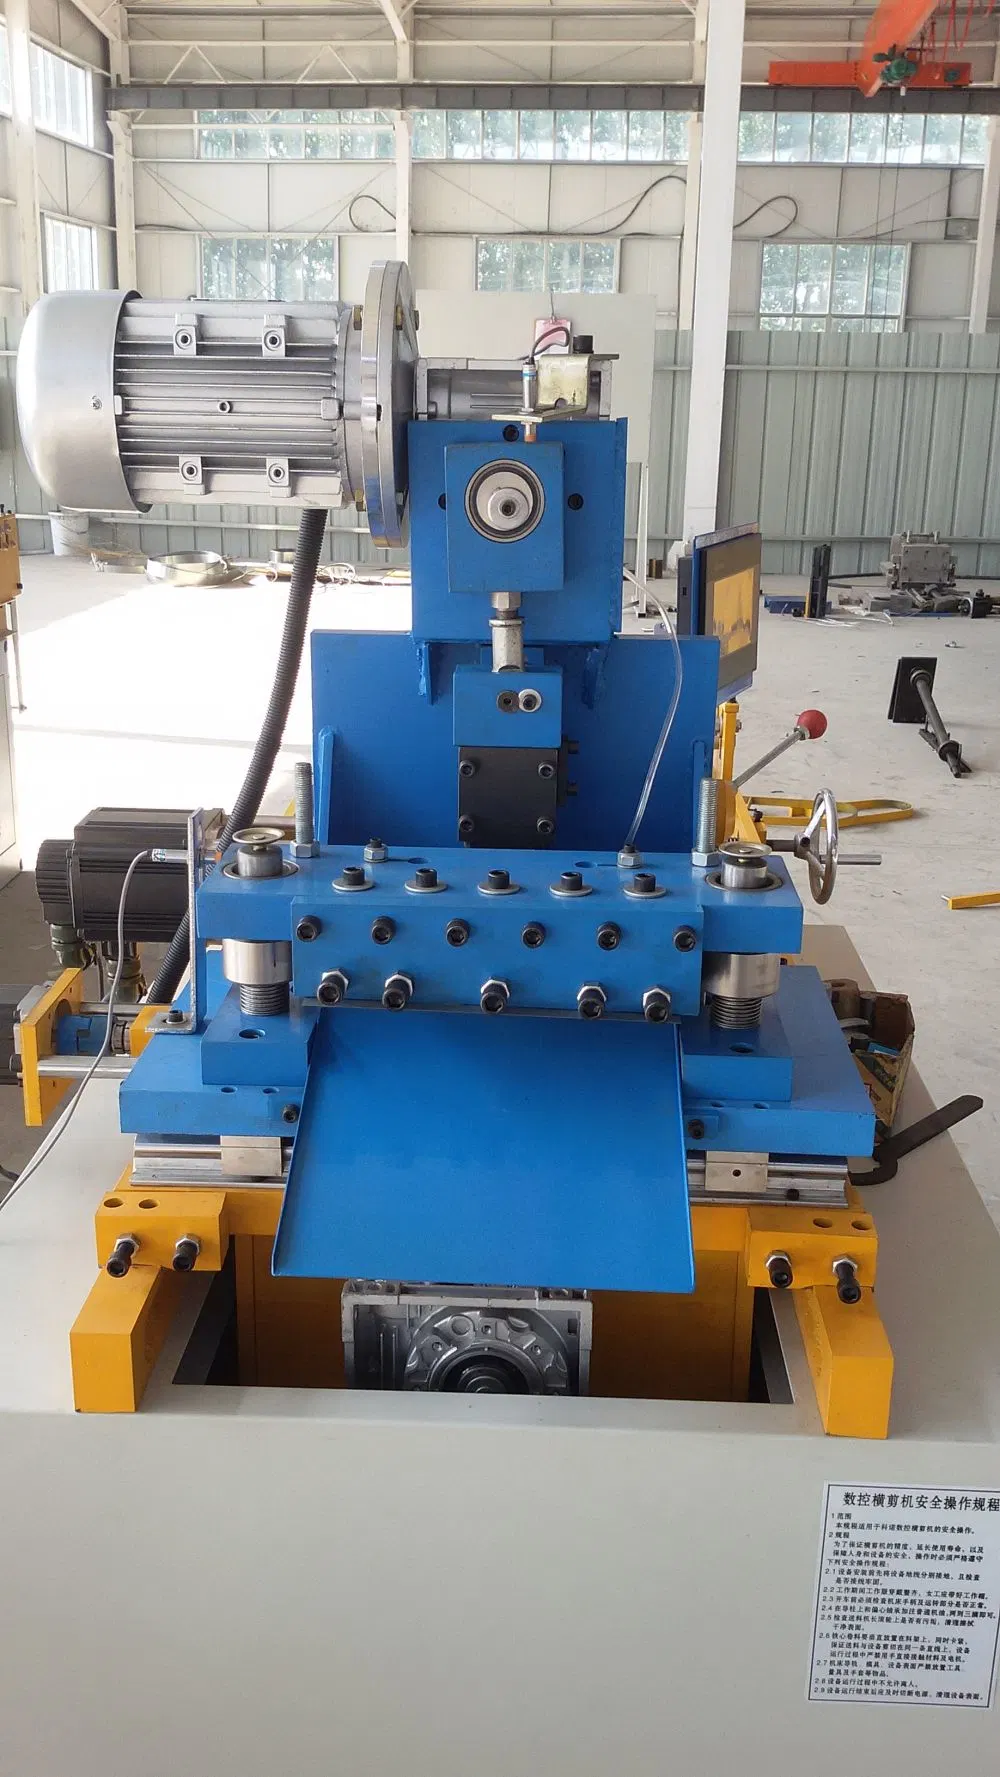 CNC Step Lap Transformer Core Cutting Machine for CRGO Electrical Silicon Steel Mitred Laminations